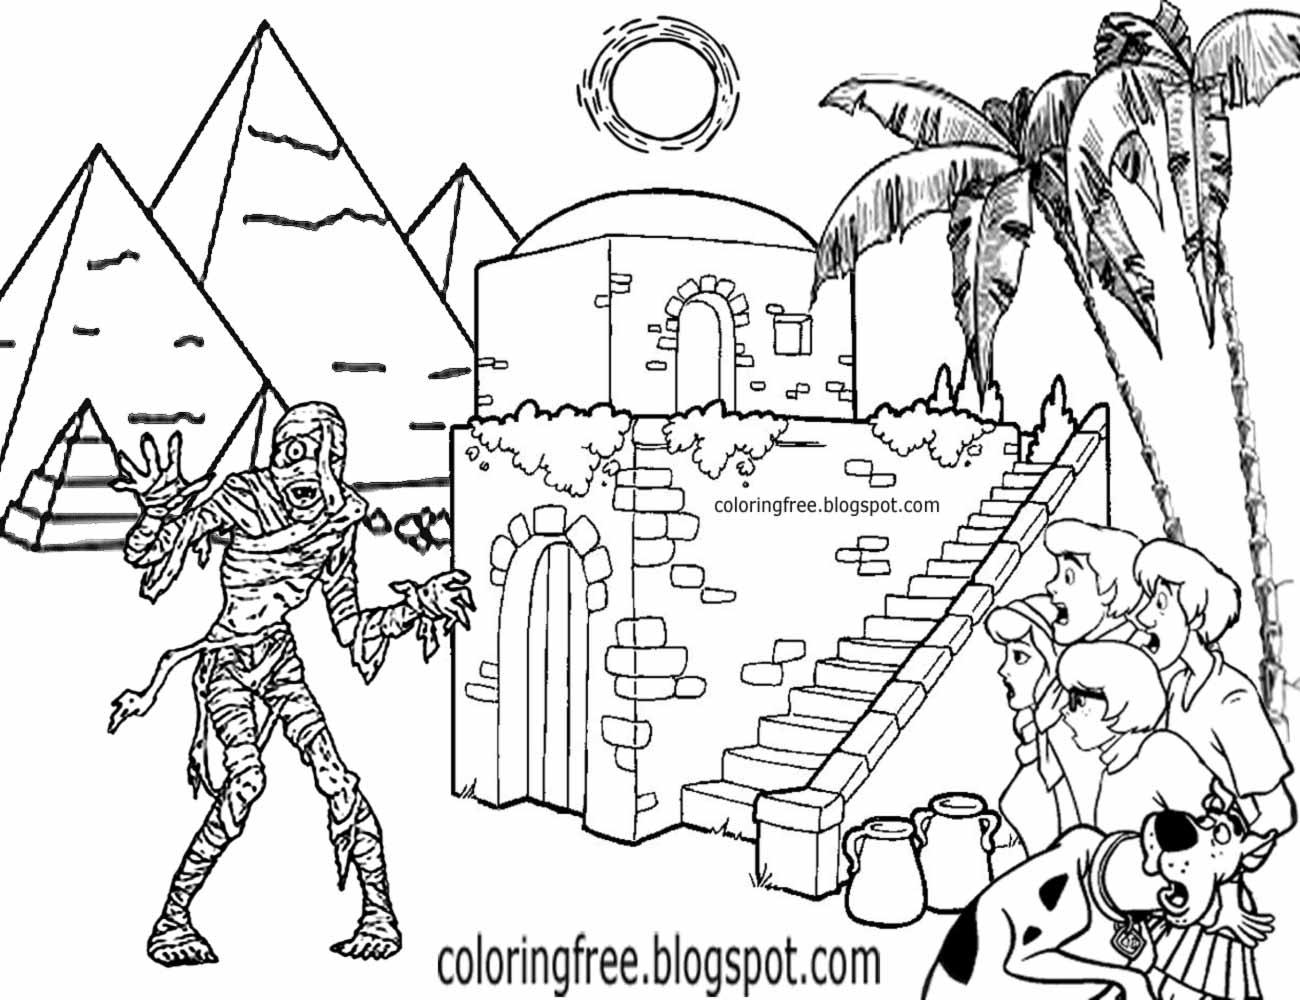 Free Coloring Pages Printable To Color Kids Drawing ideas